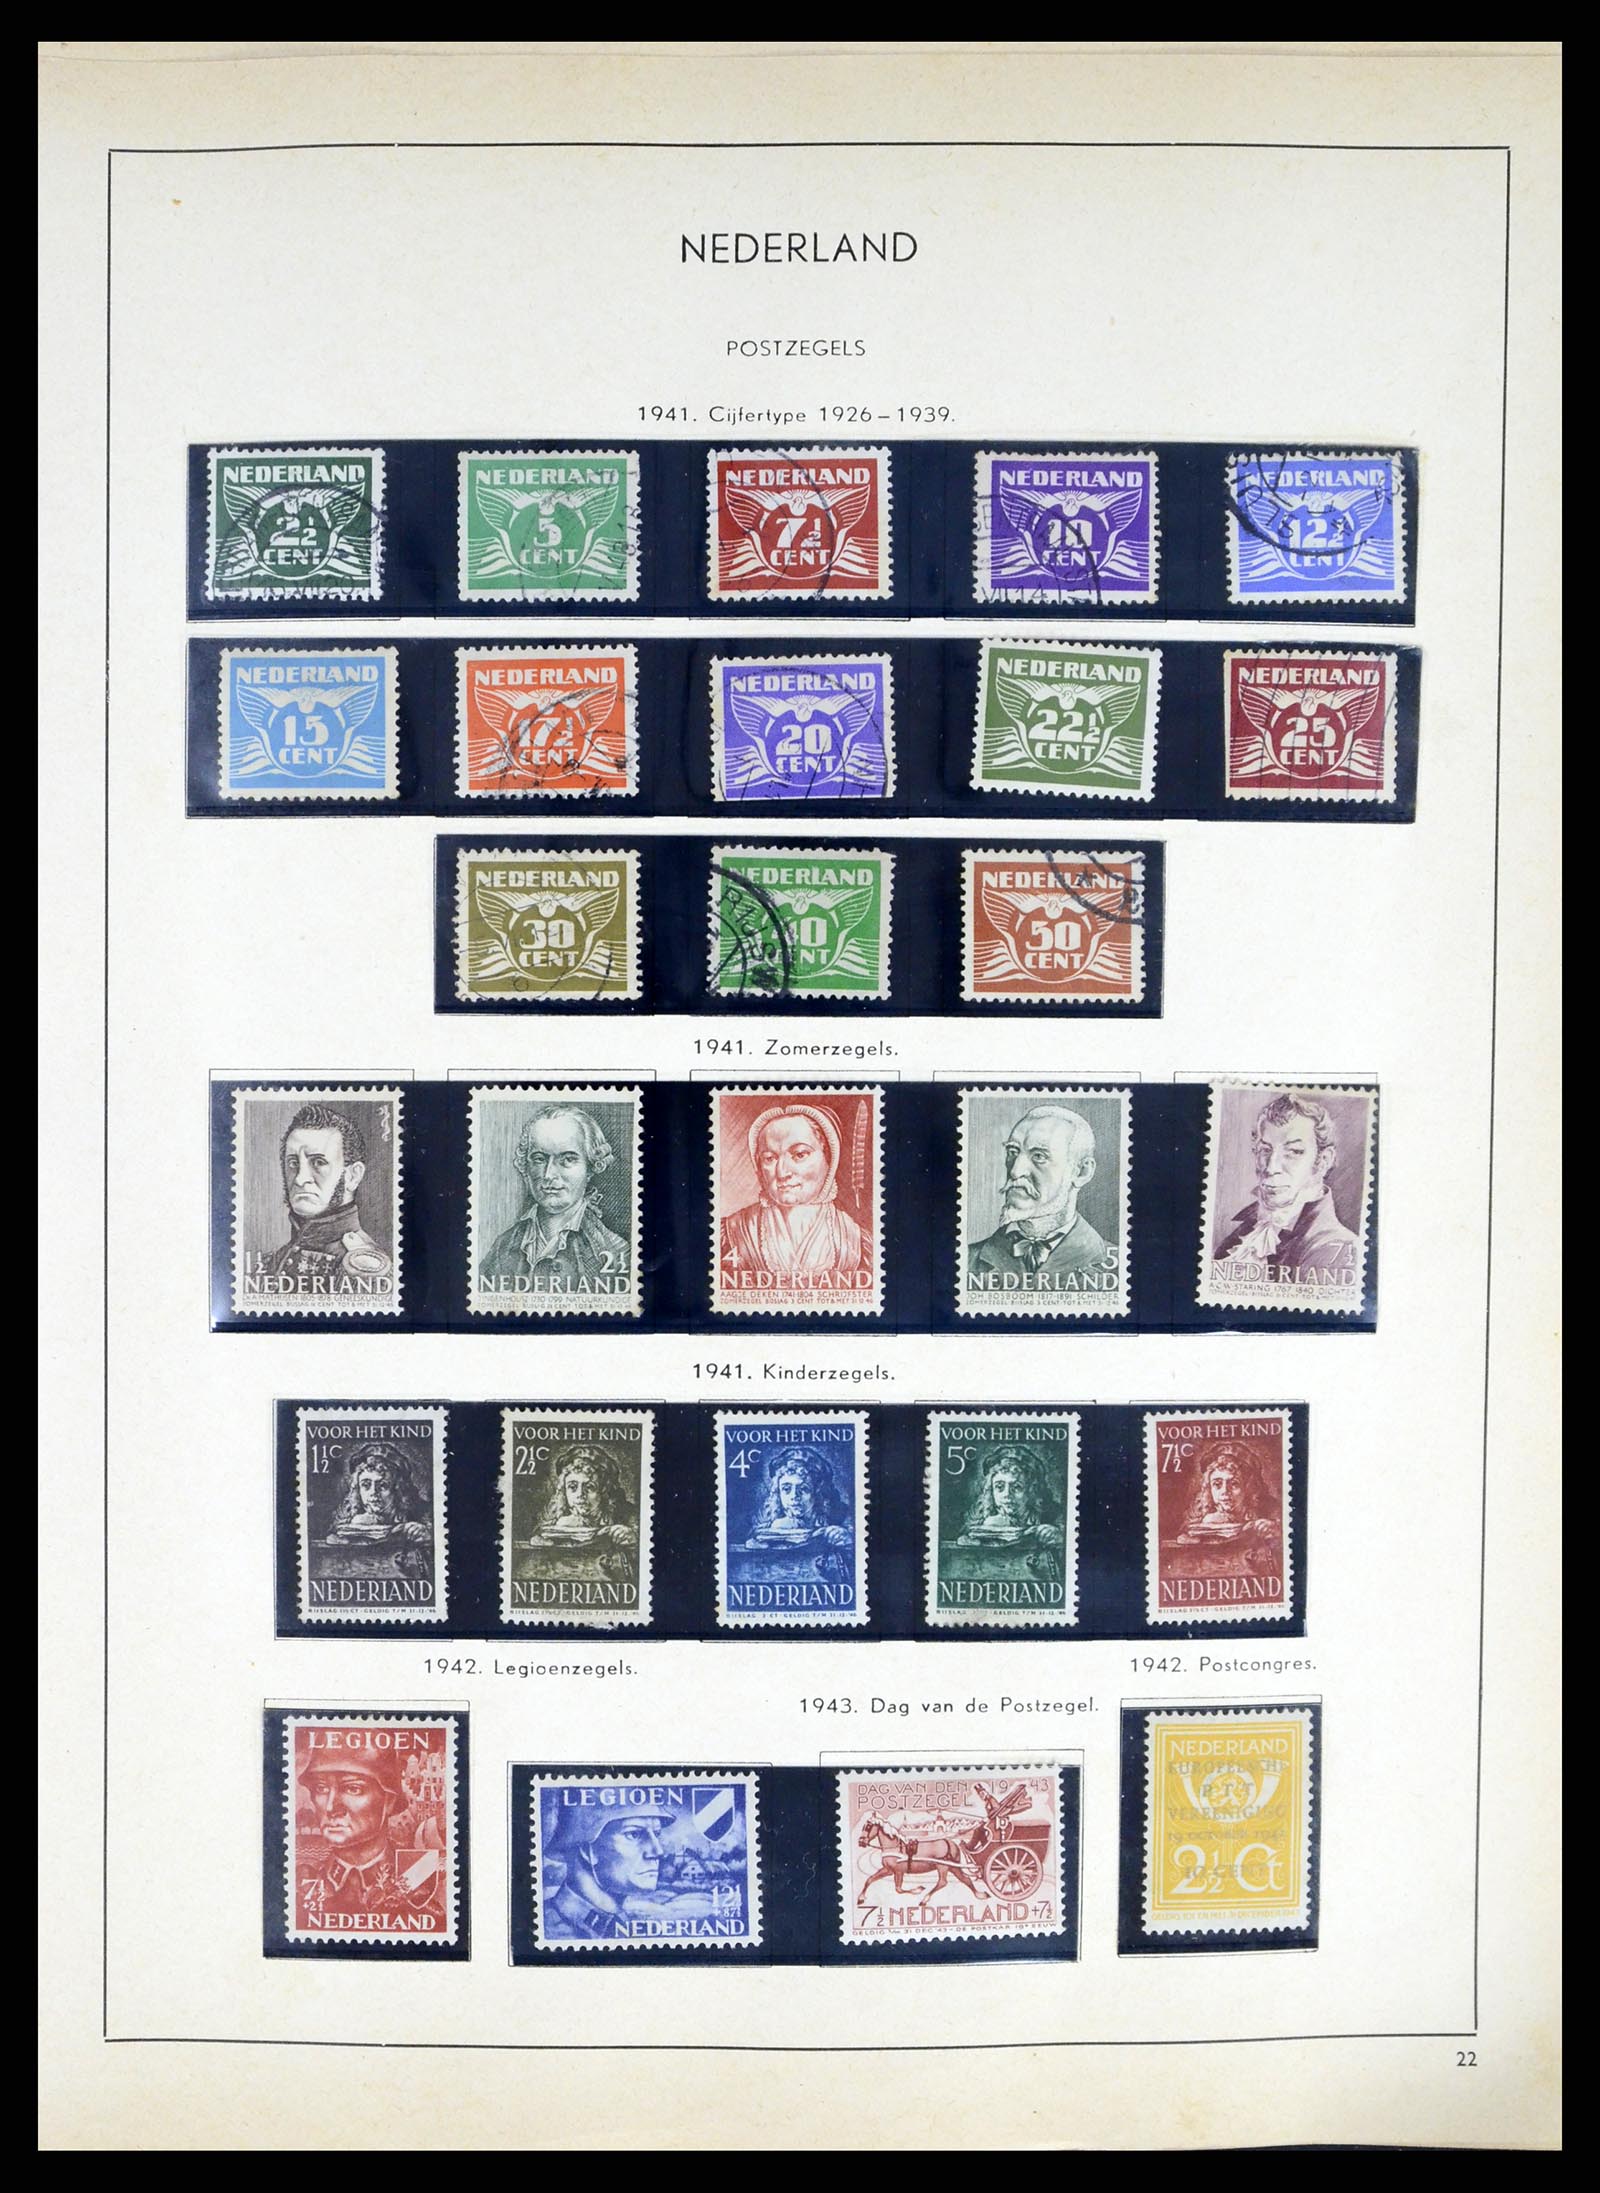 37618 018 - Stamp collection 37618 Netherlands and territories 1852-1972.